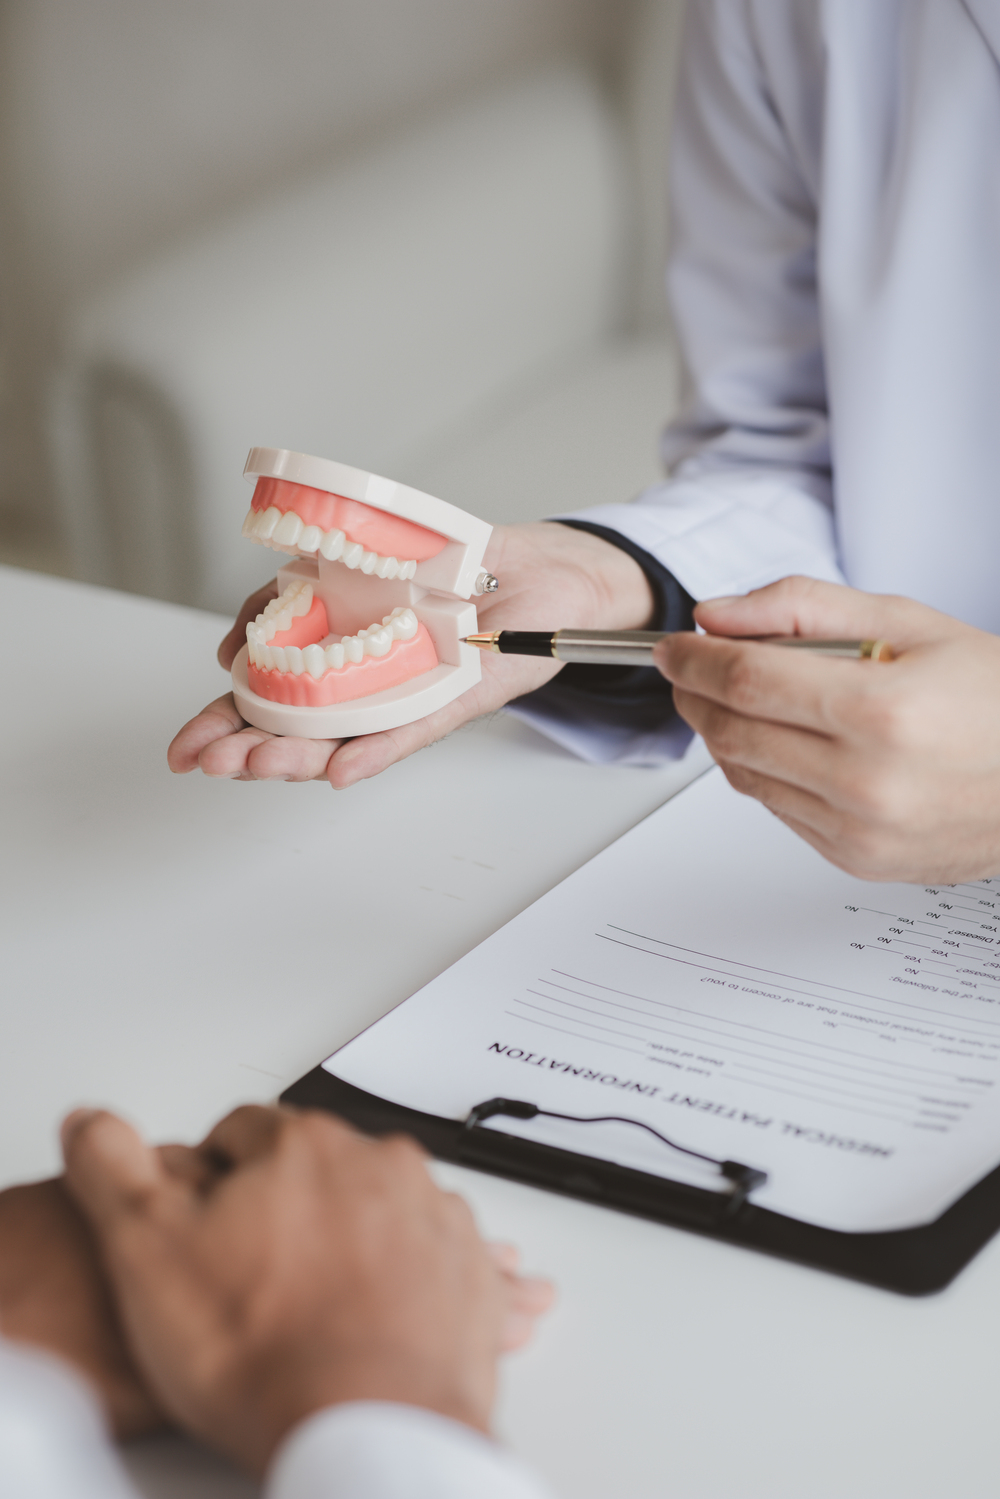 Dentists are providing dental treatment consultations to patients undergoing dental pain treatment, root canal treatment, cavities, hygiene and healthy teeth. Dentistry concept.